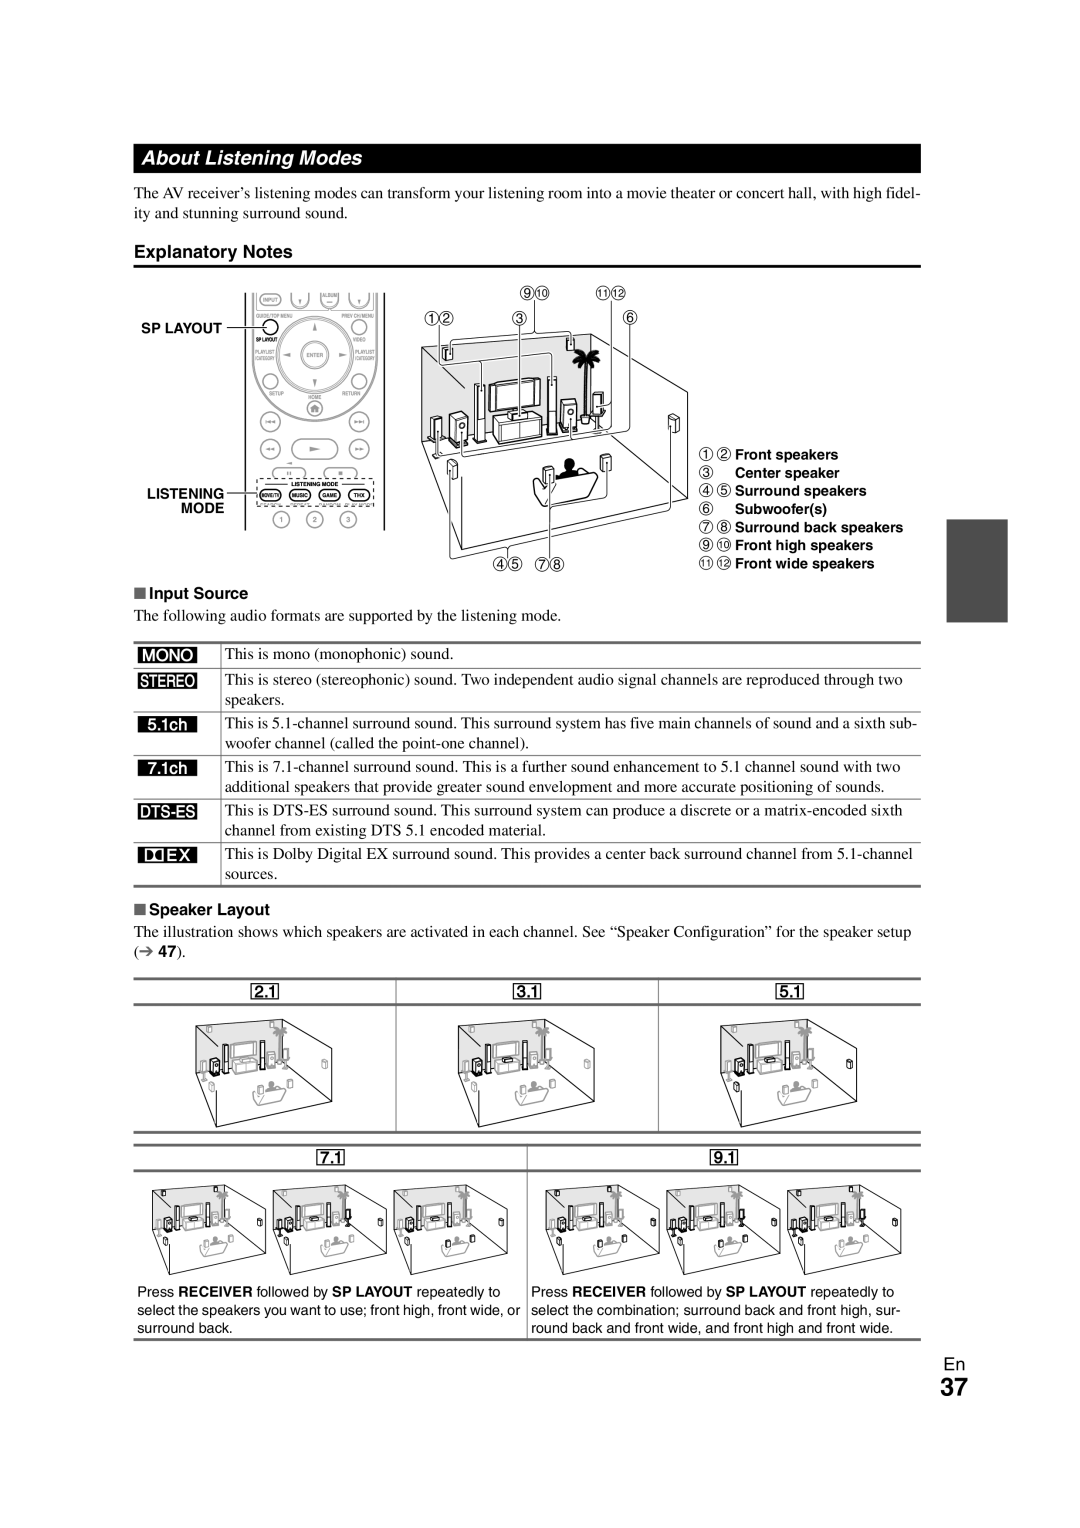 Onkyo TX-NR1008 instruction manual About Listening Modes, Explanatory Notes, Input Source, Speaker Layout 